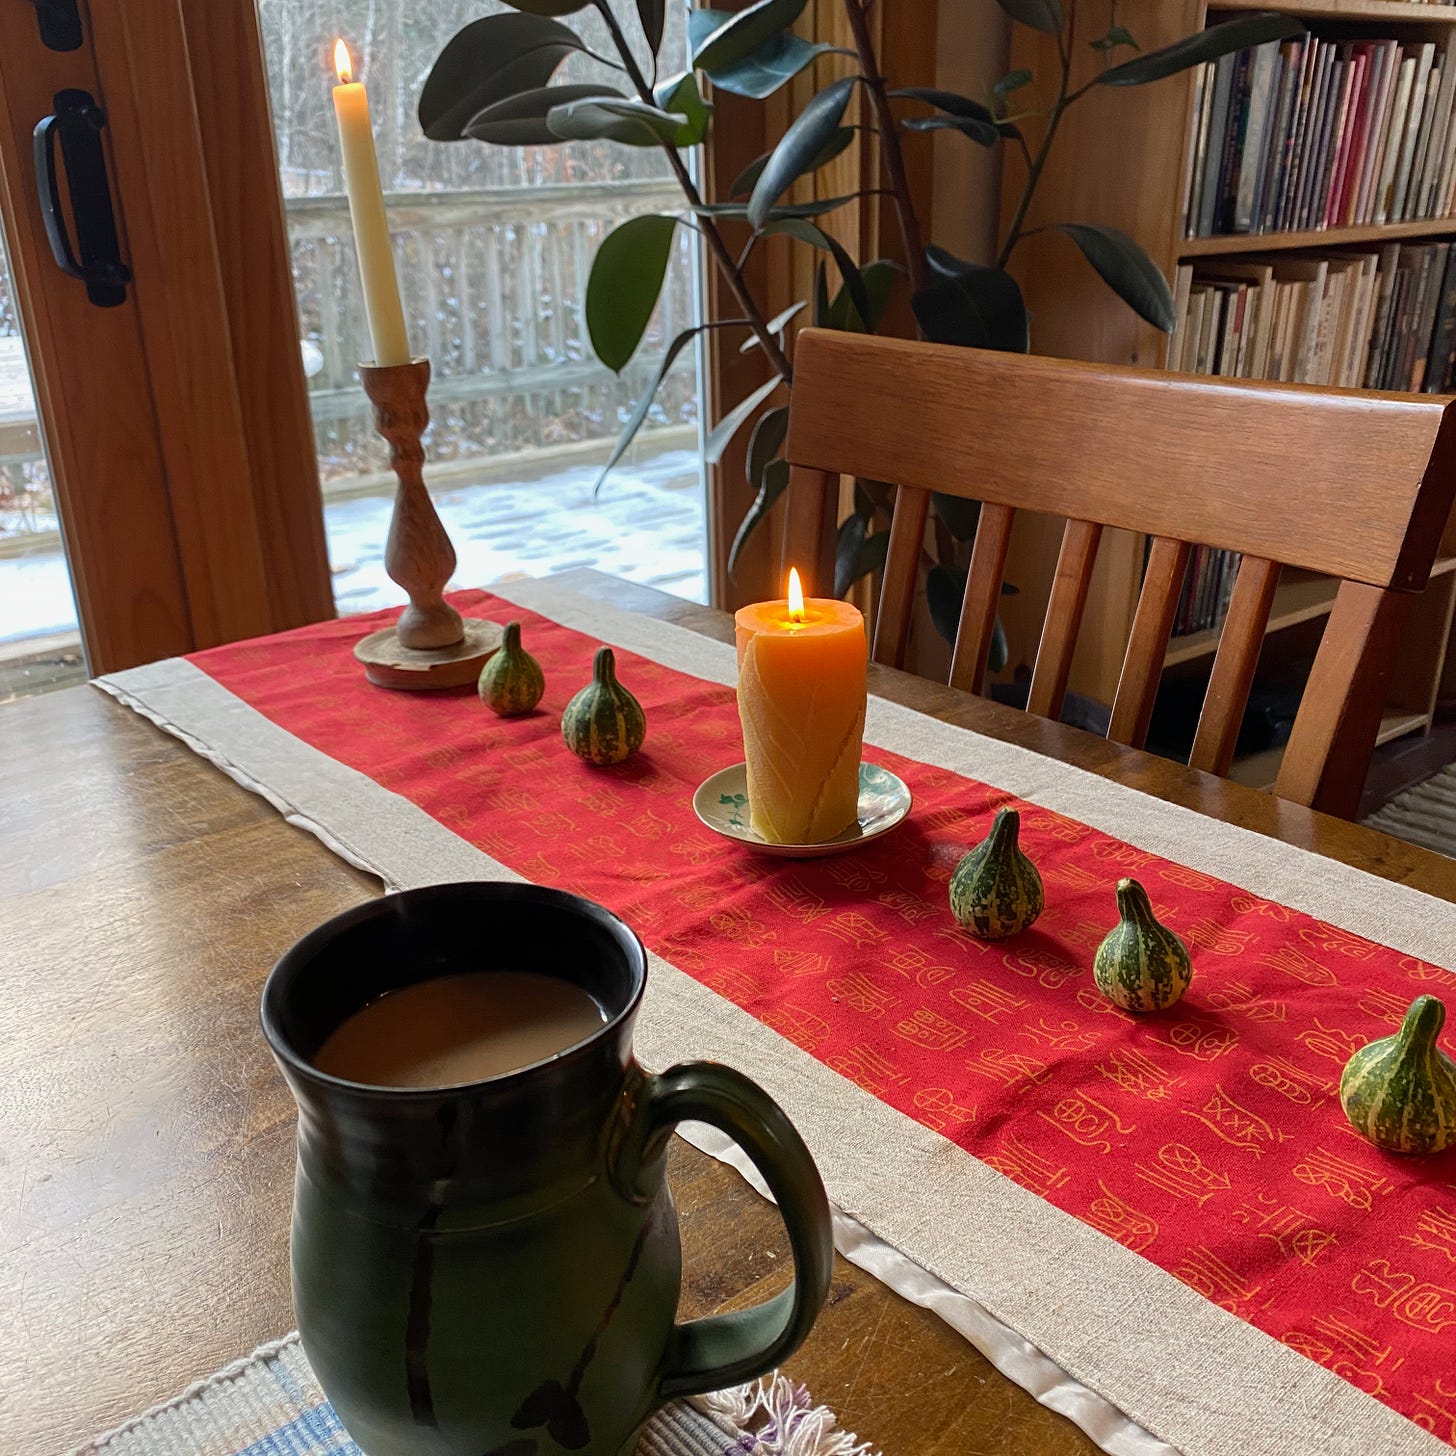 A mug of tea sitting on a table next to several lit candles on a red cloth.